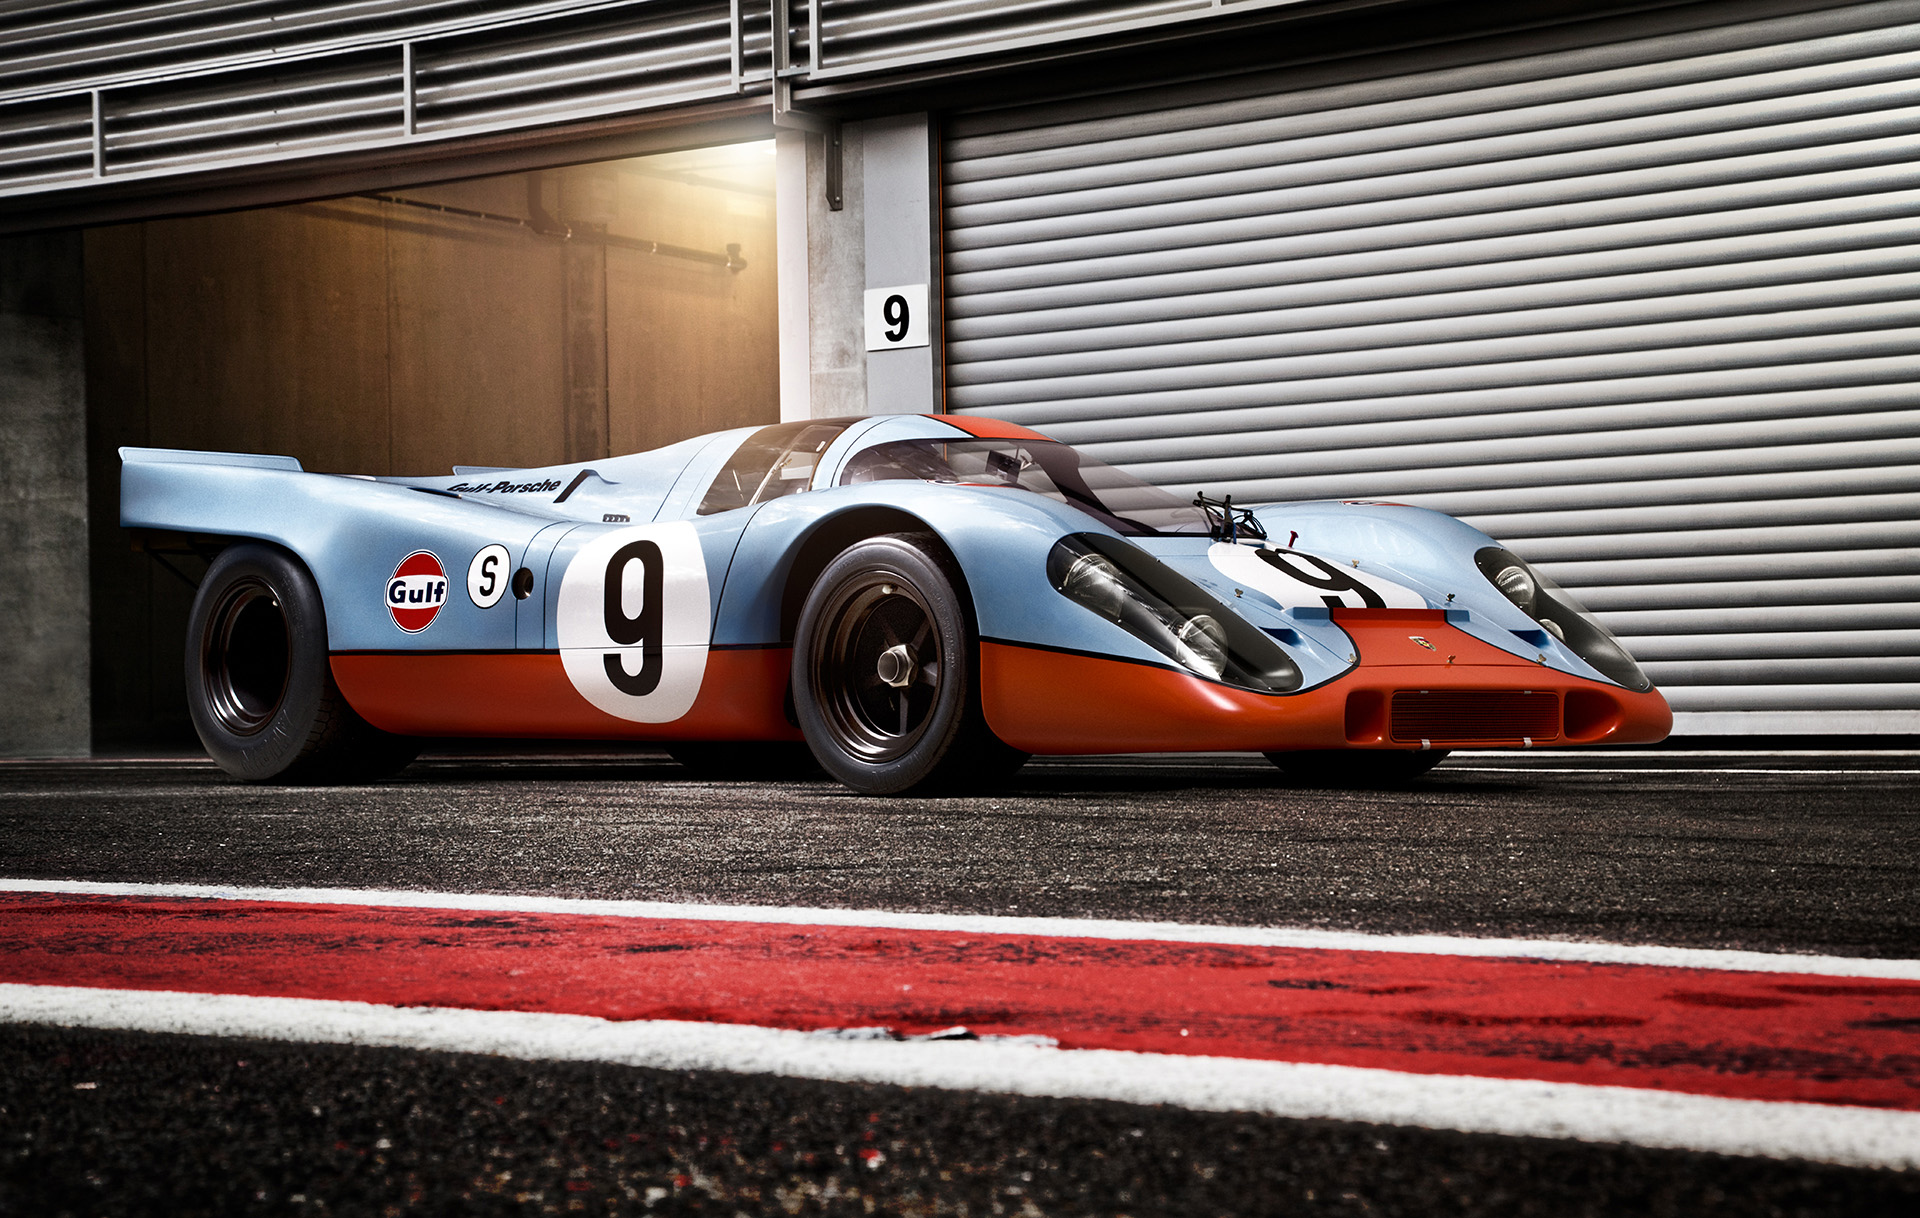 Gulf Porsche 917 Le Mans photographed in France